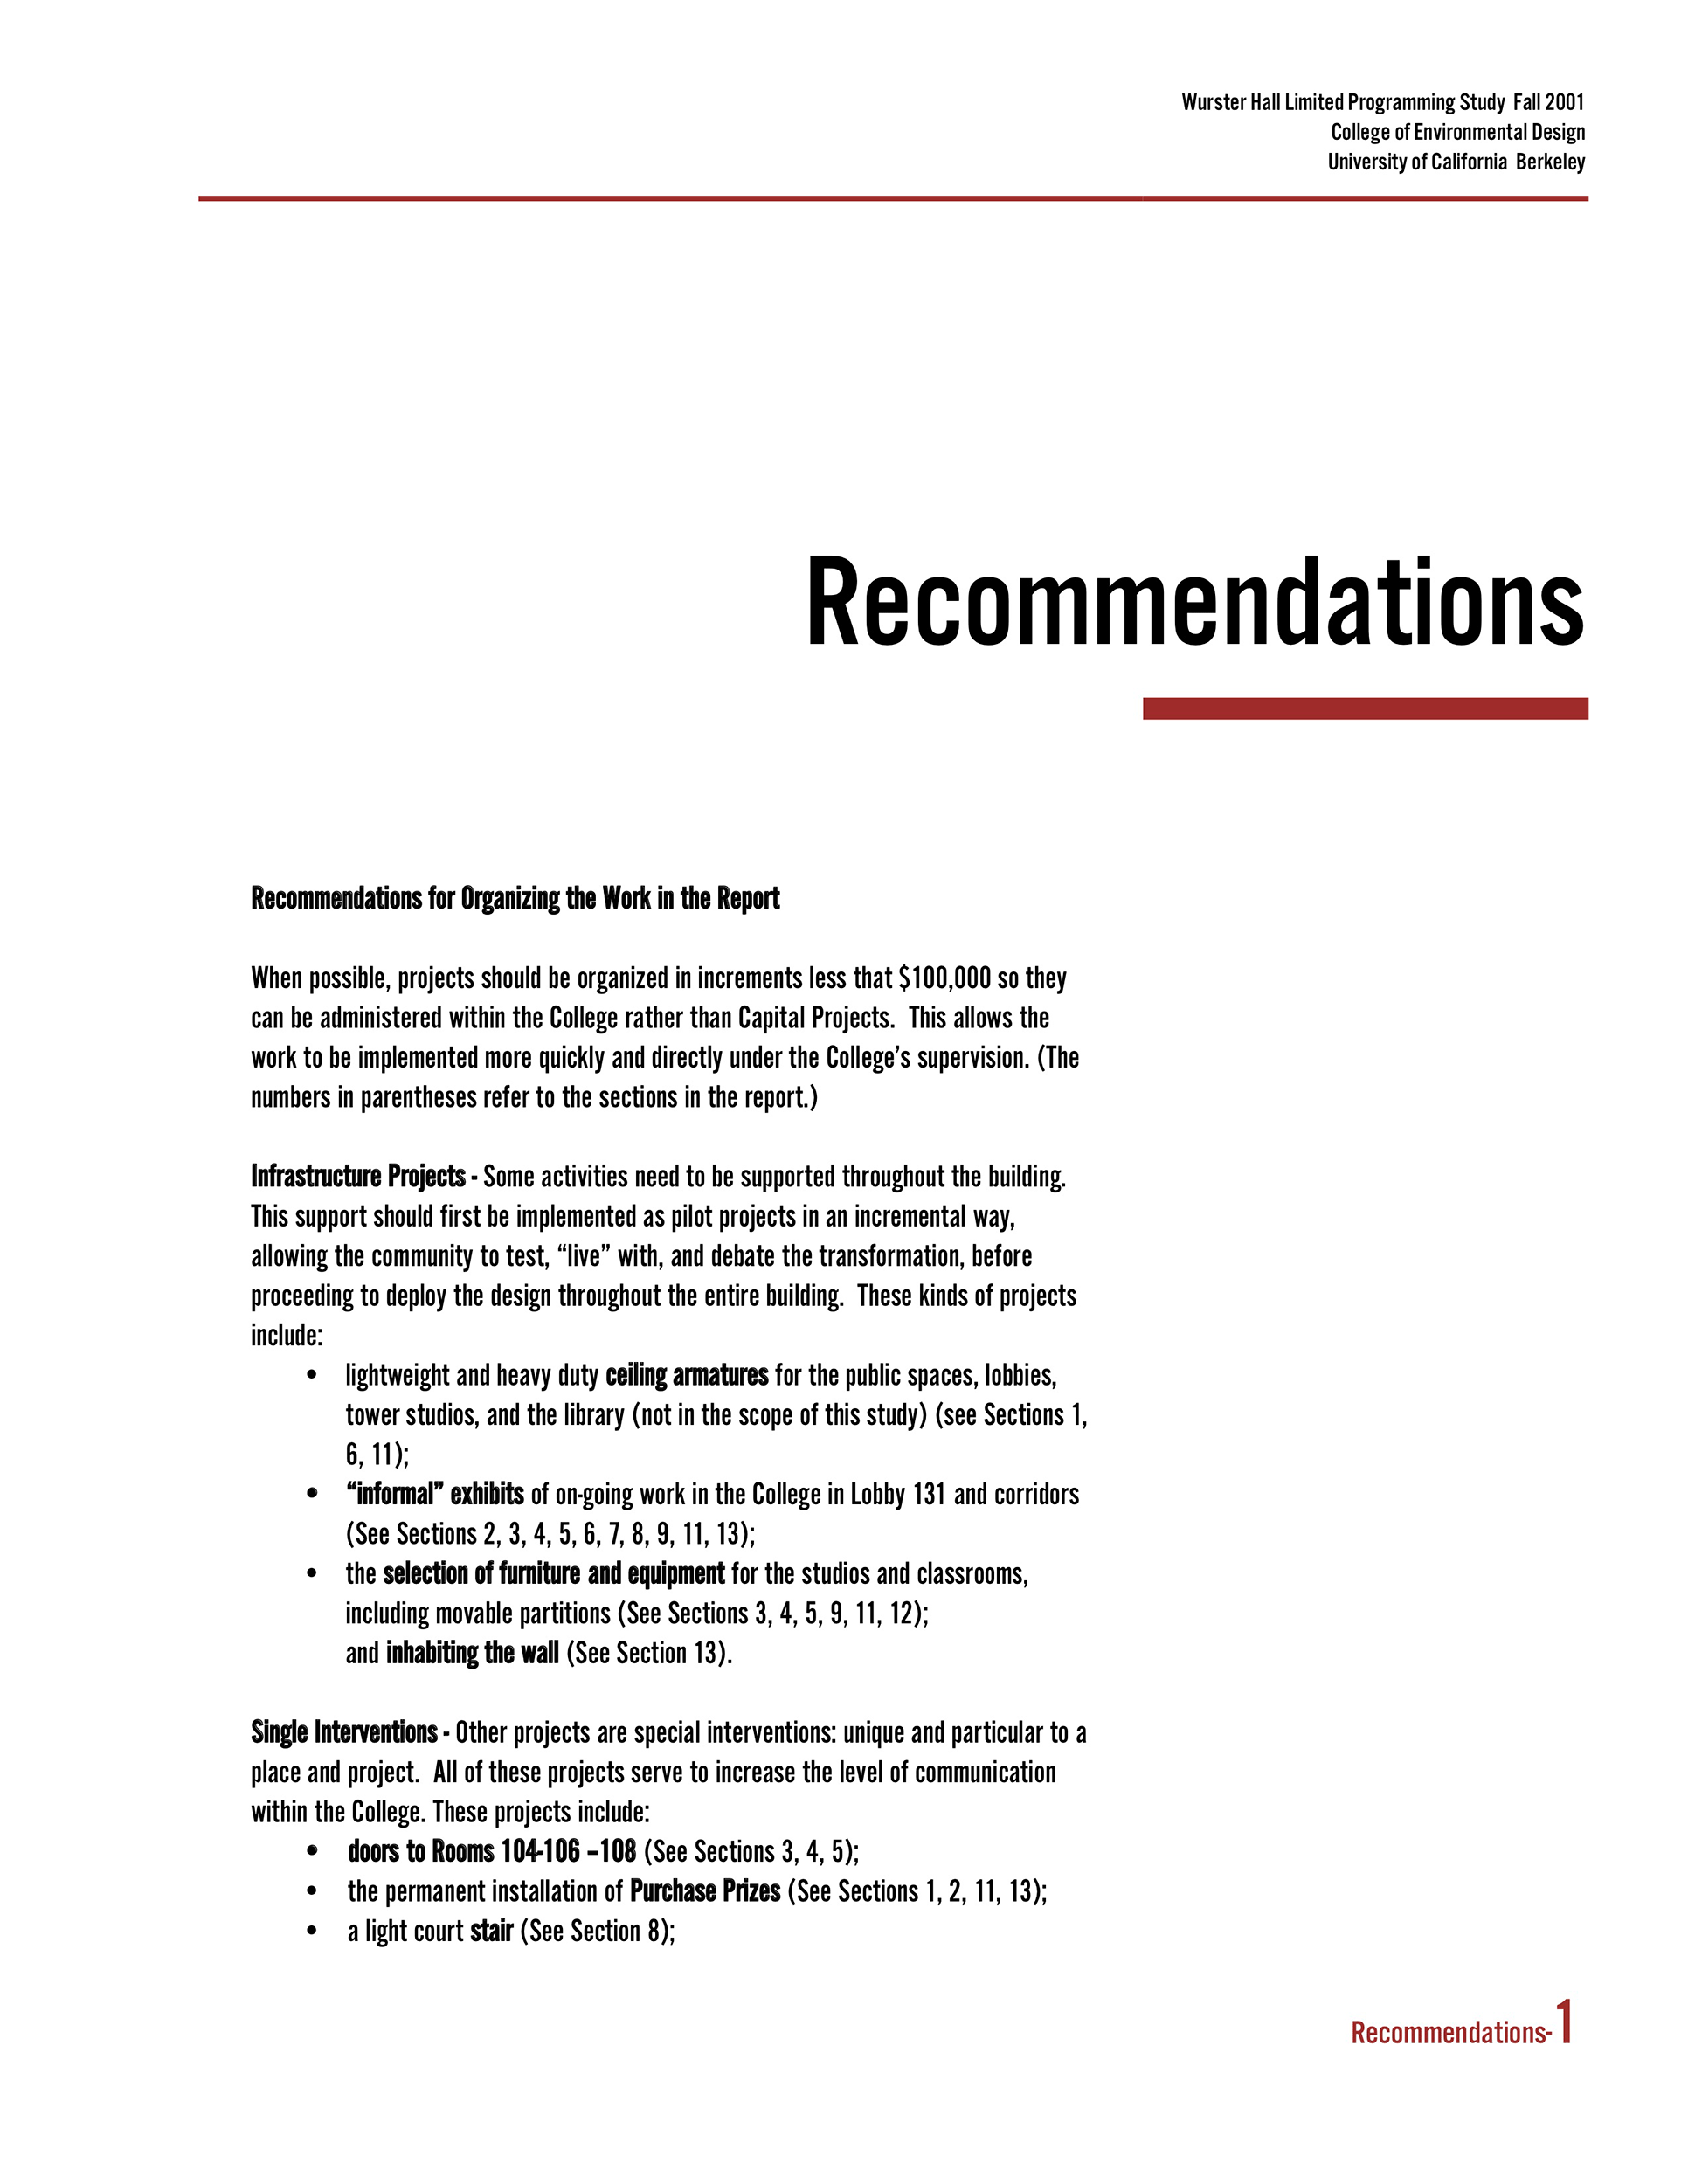 Recommendations-(dragged).gif